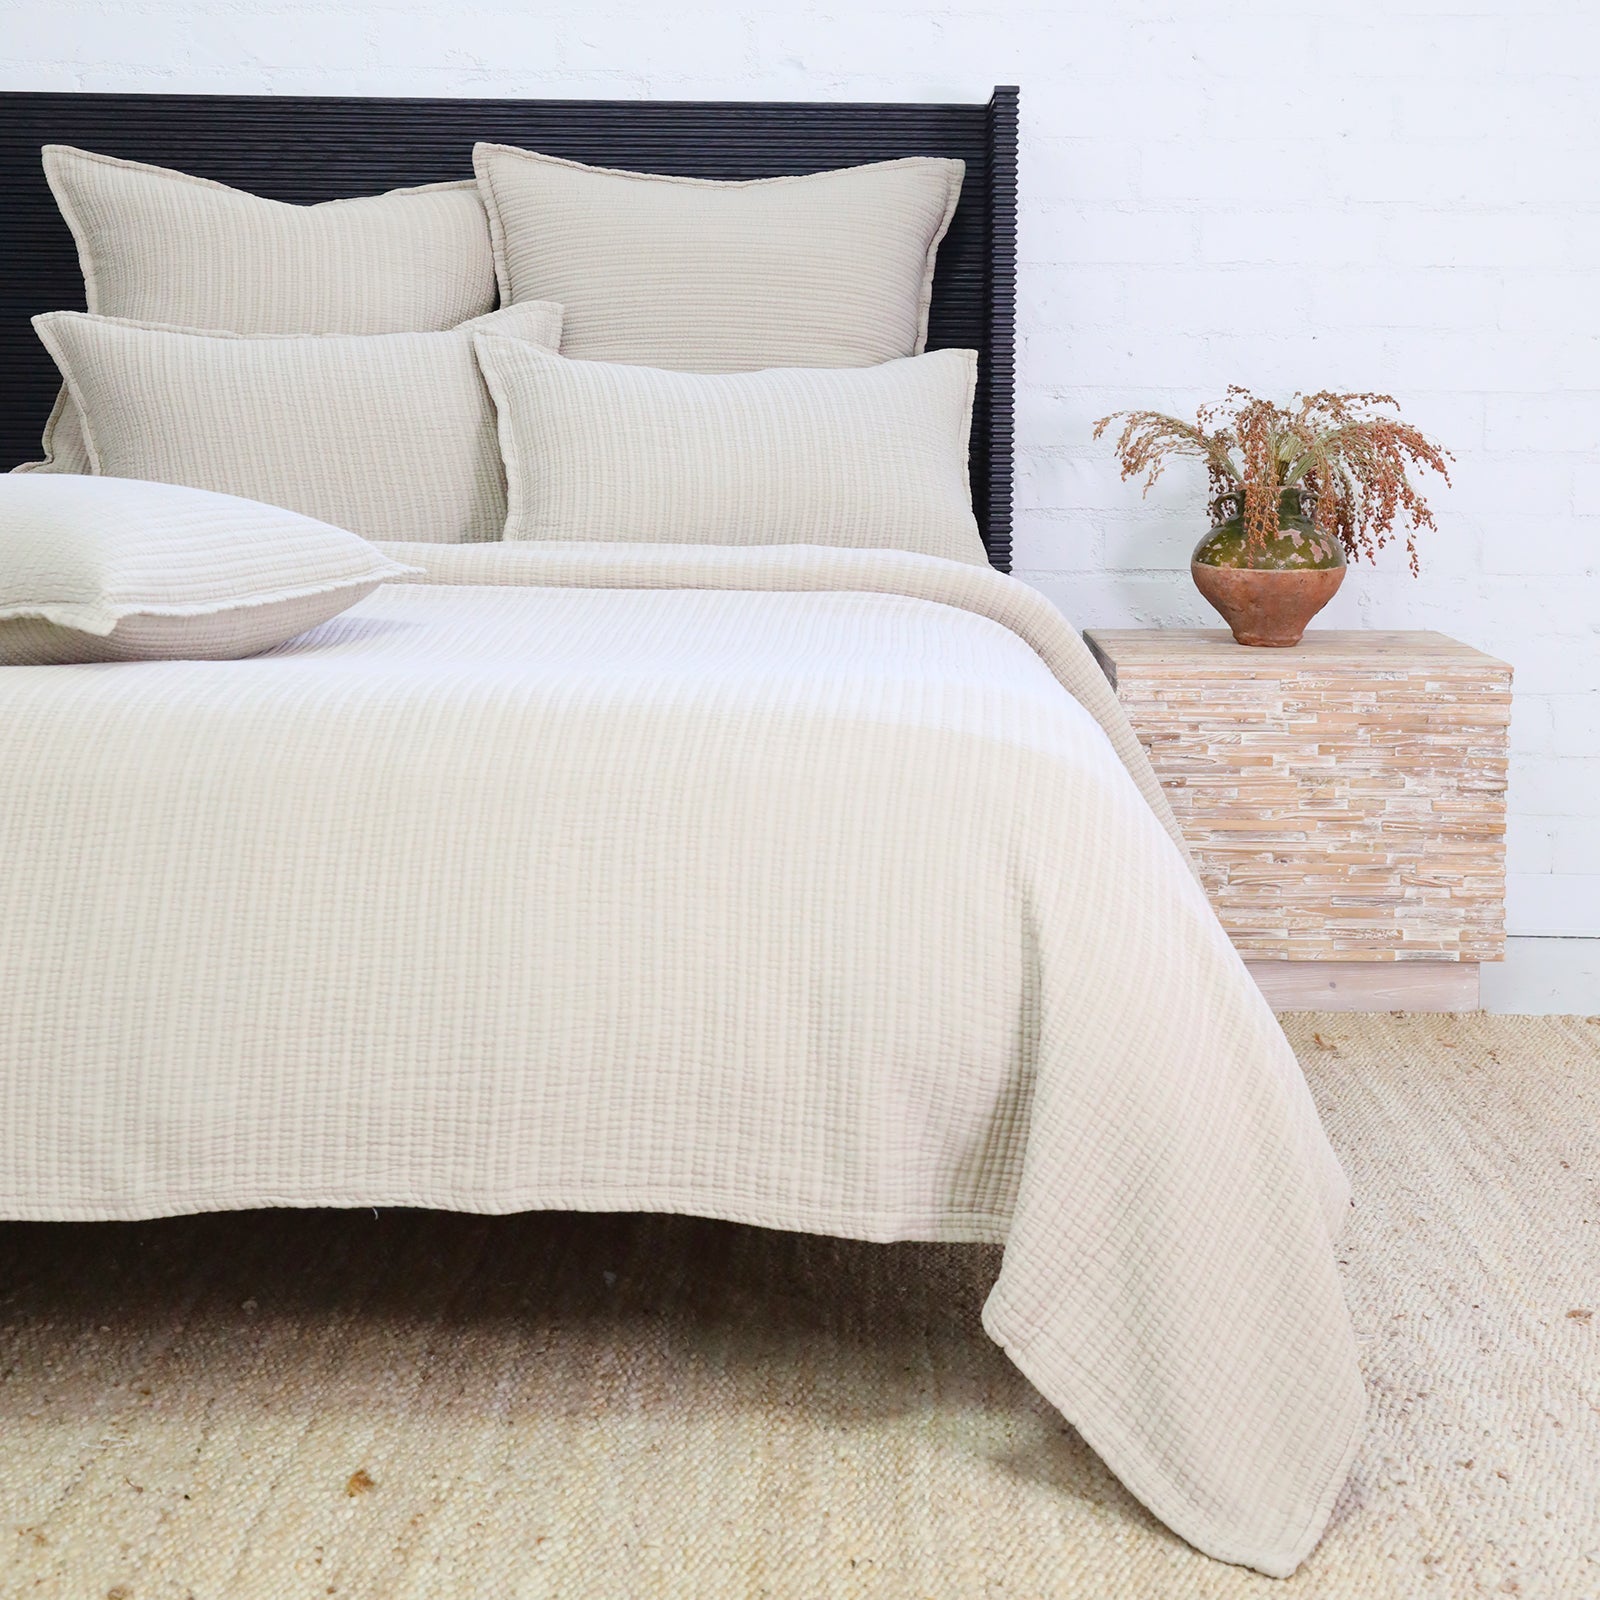 chatham matelasse collection - natural color - coverlet - pom pom at home